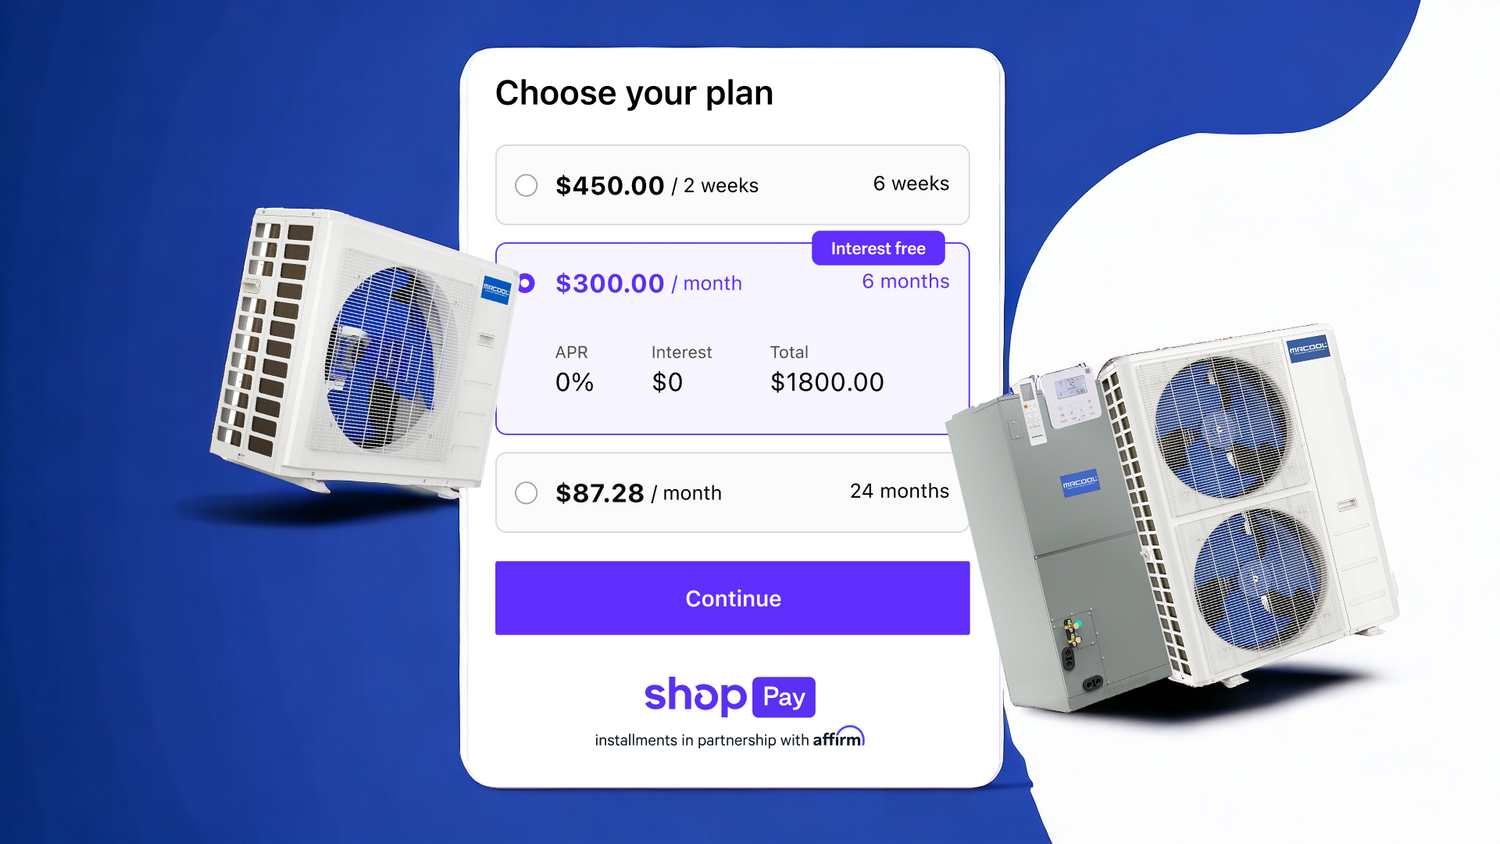 Modern HVAC units, including mini-split air conditioning, displayed alongside a digital payment plan interface, highlighting flexible financing options for an easier purchase experience.